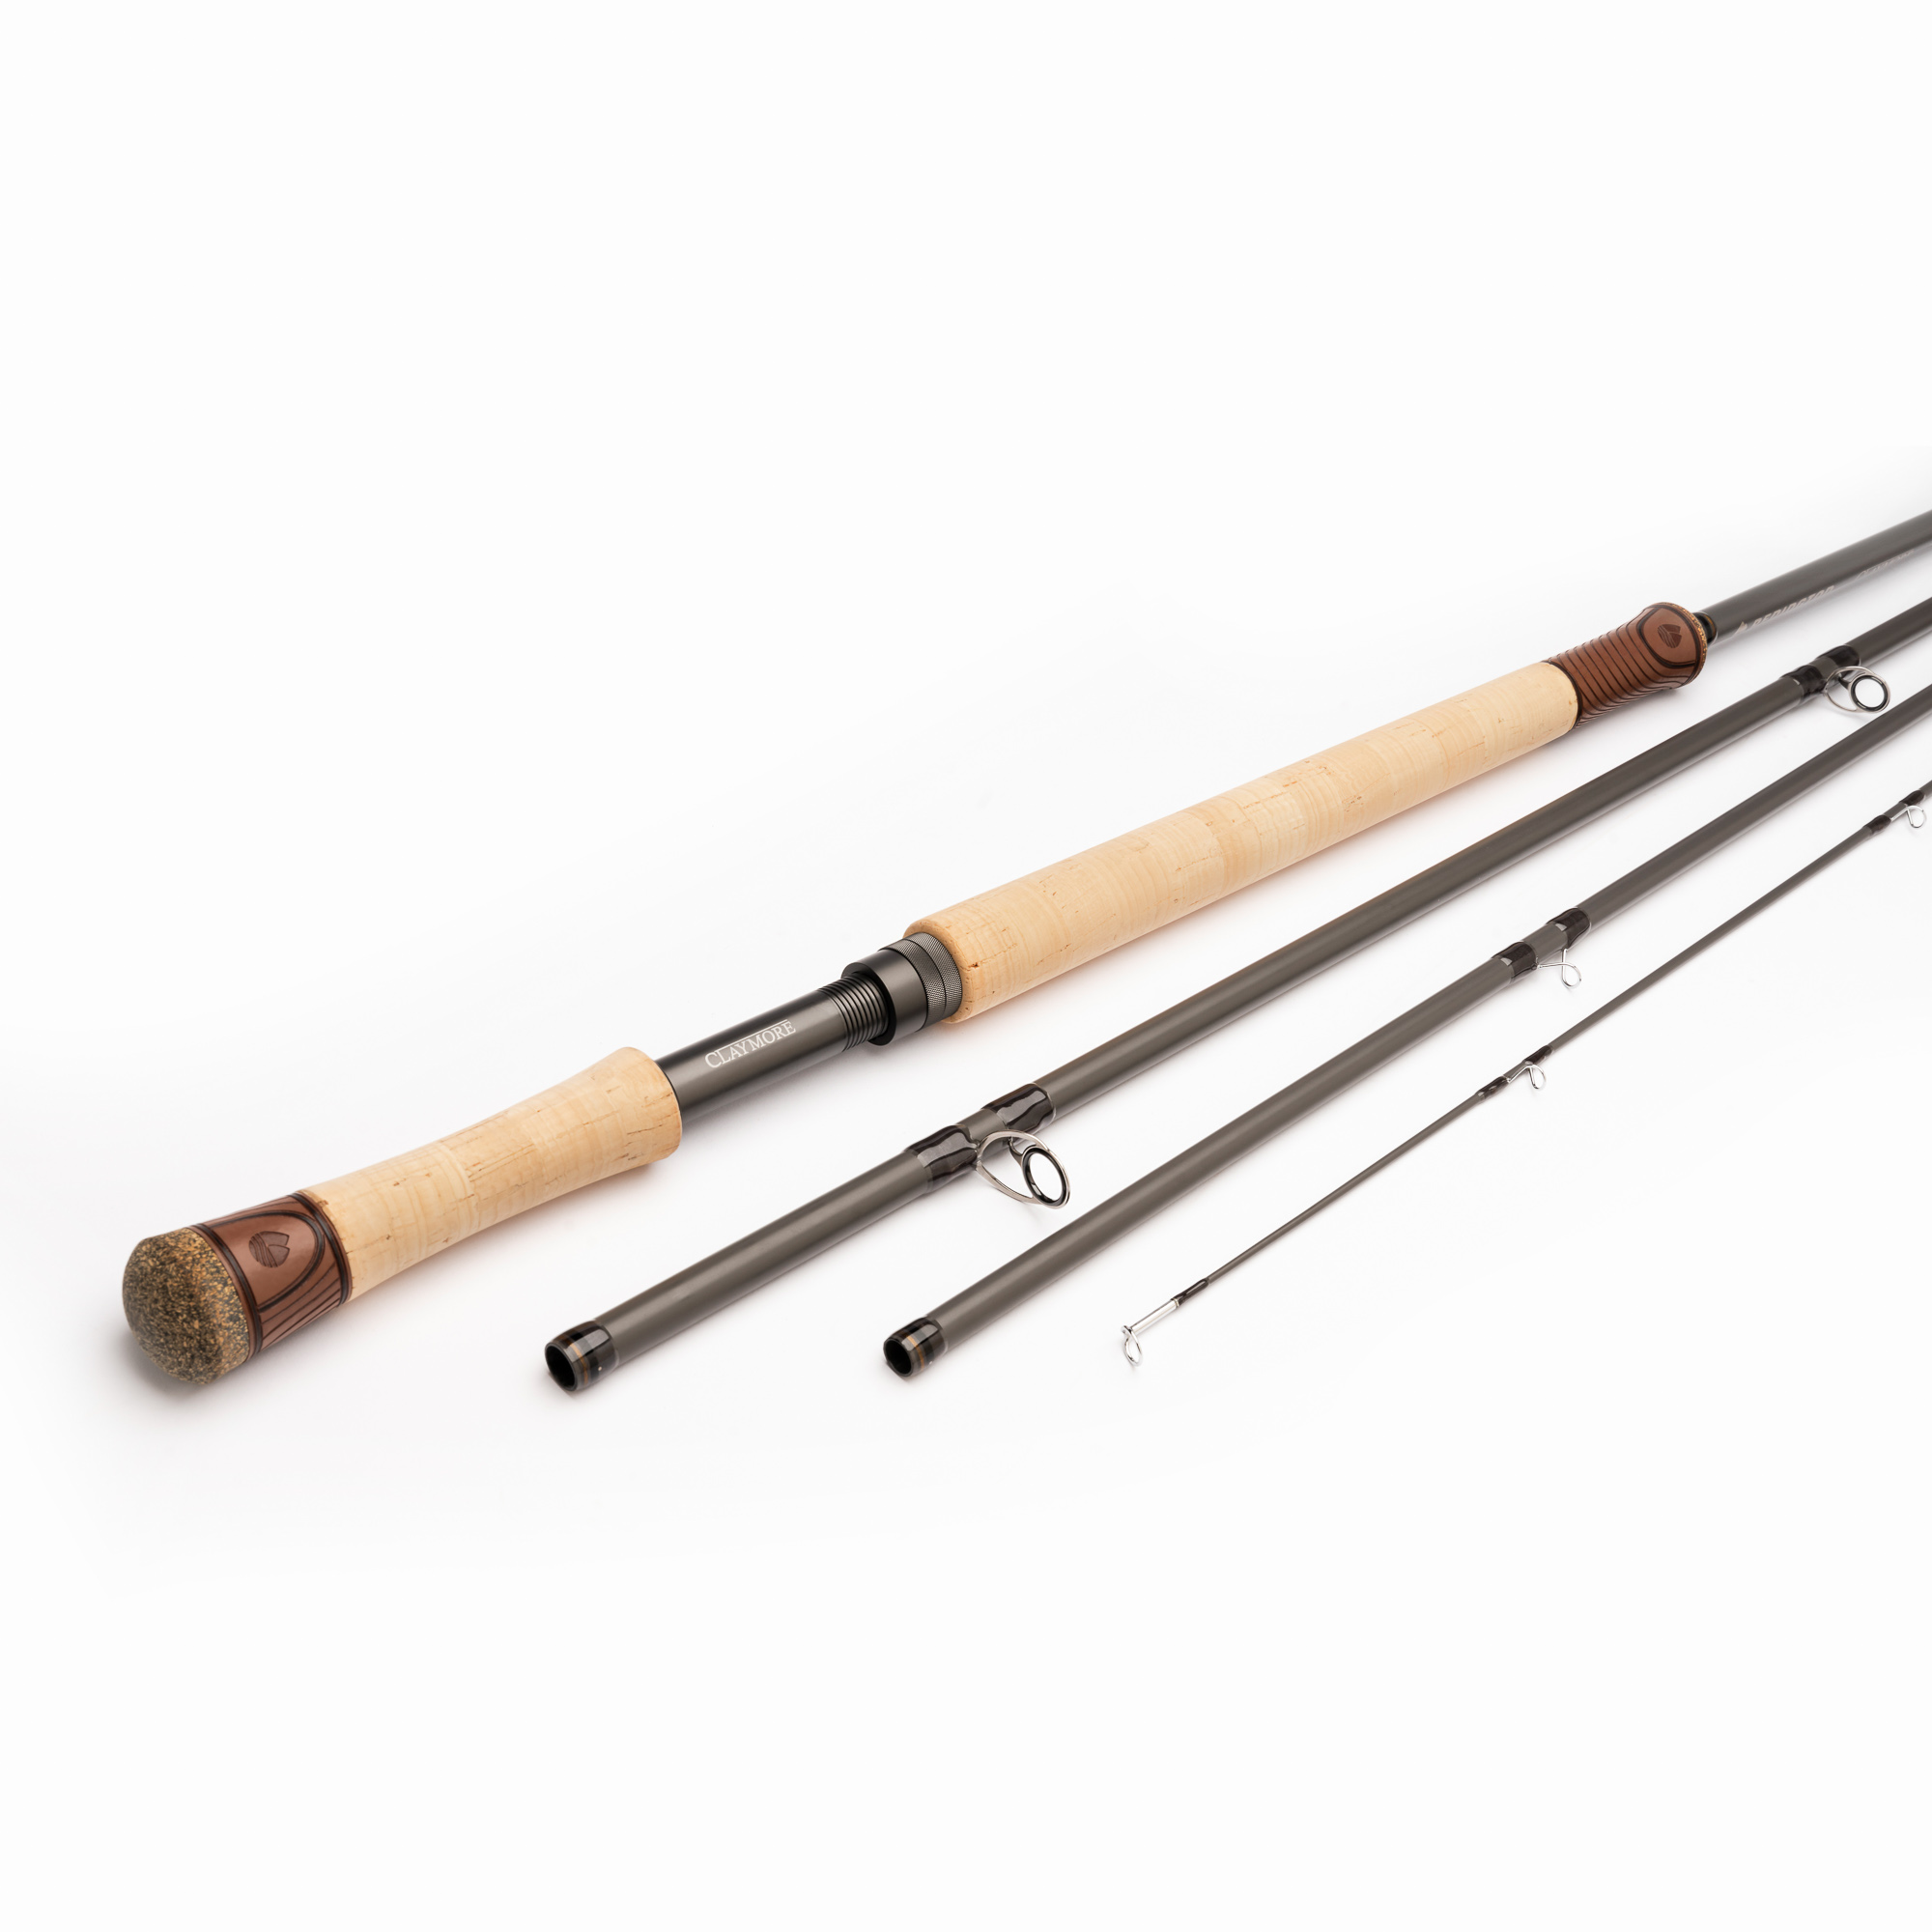 Redington Claymore DH Fly Rod – Guide Flyfishing